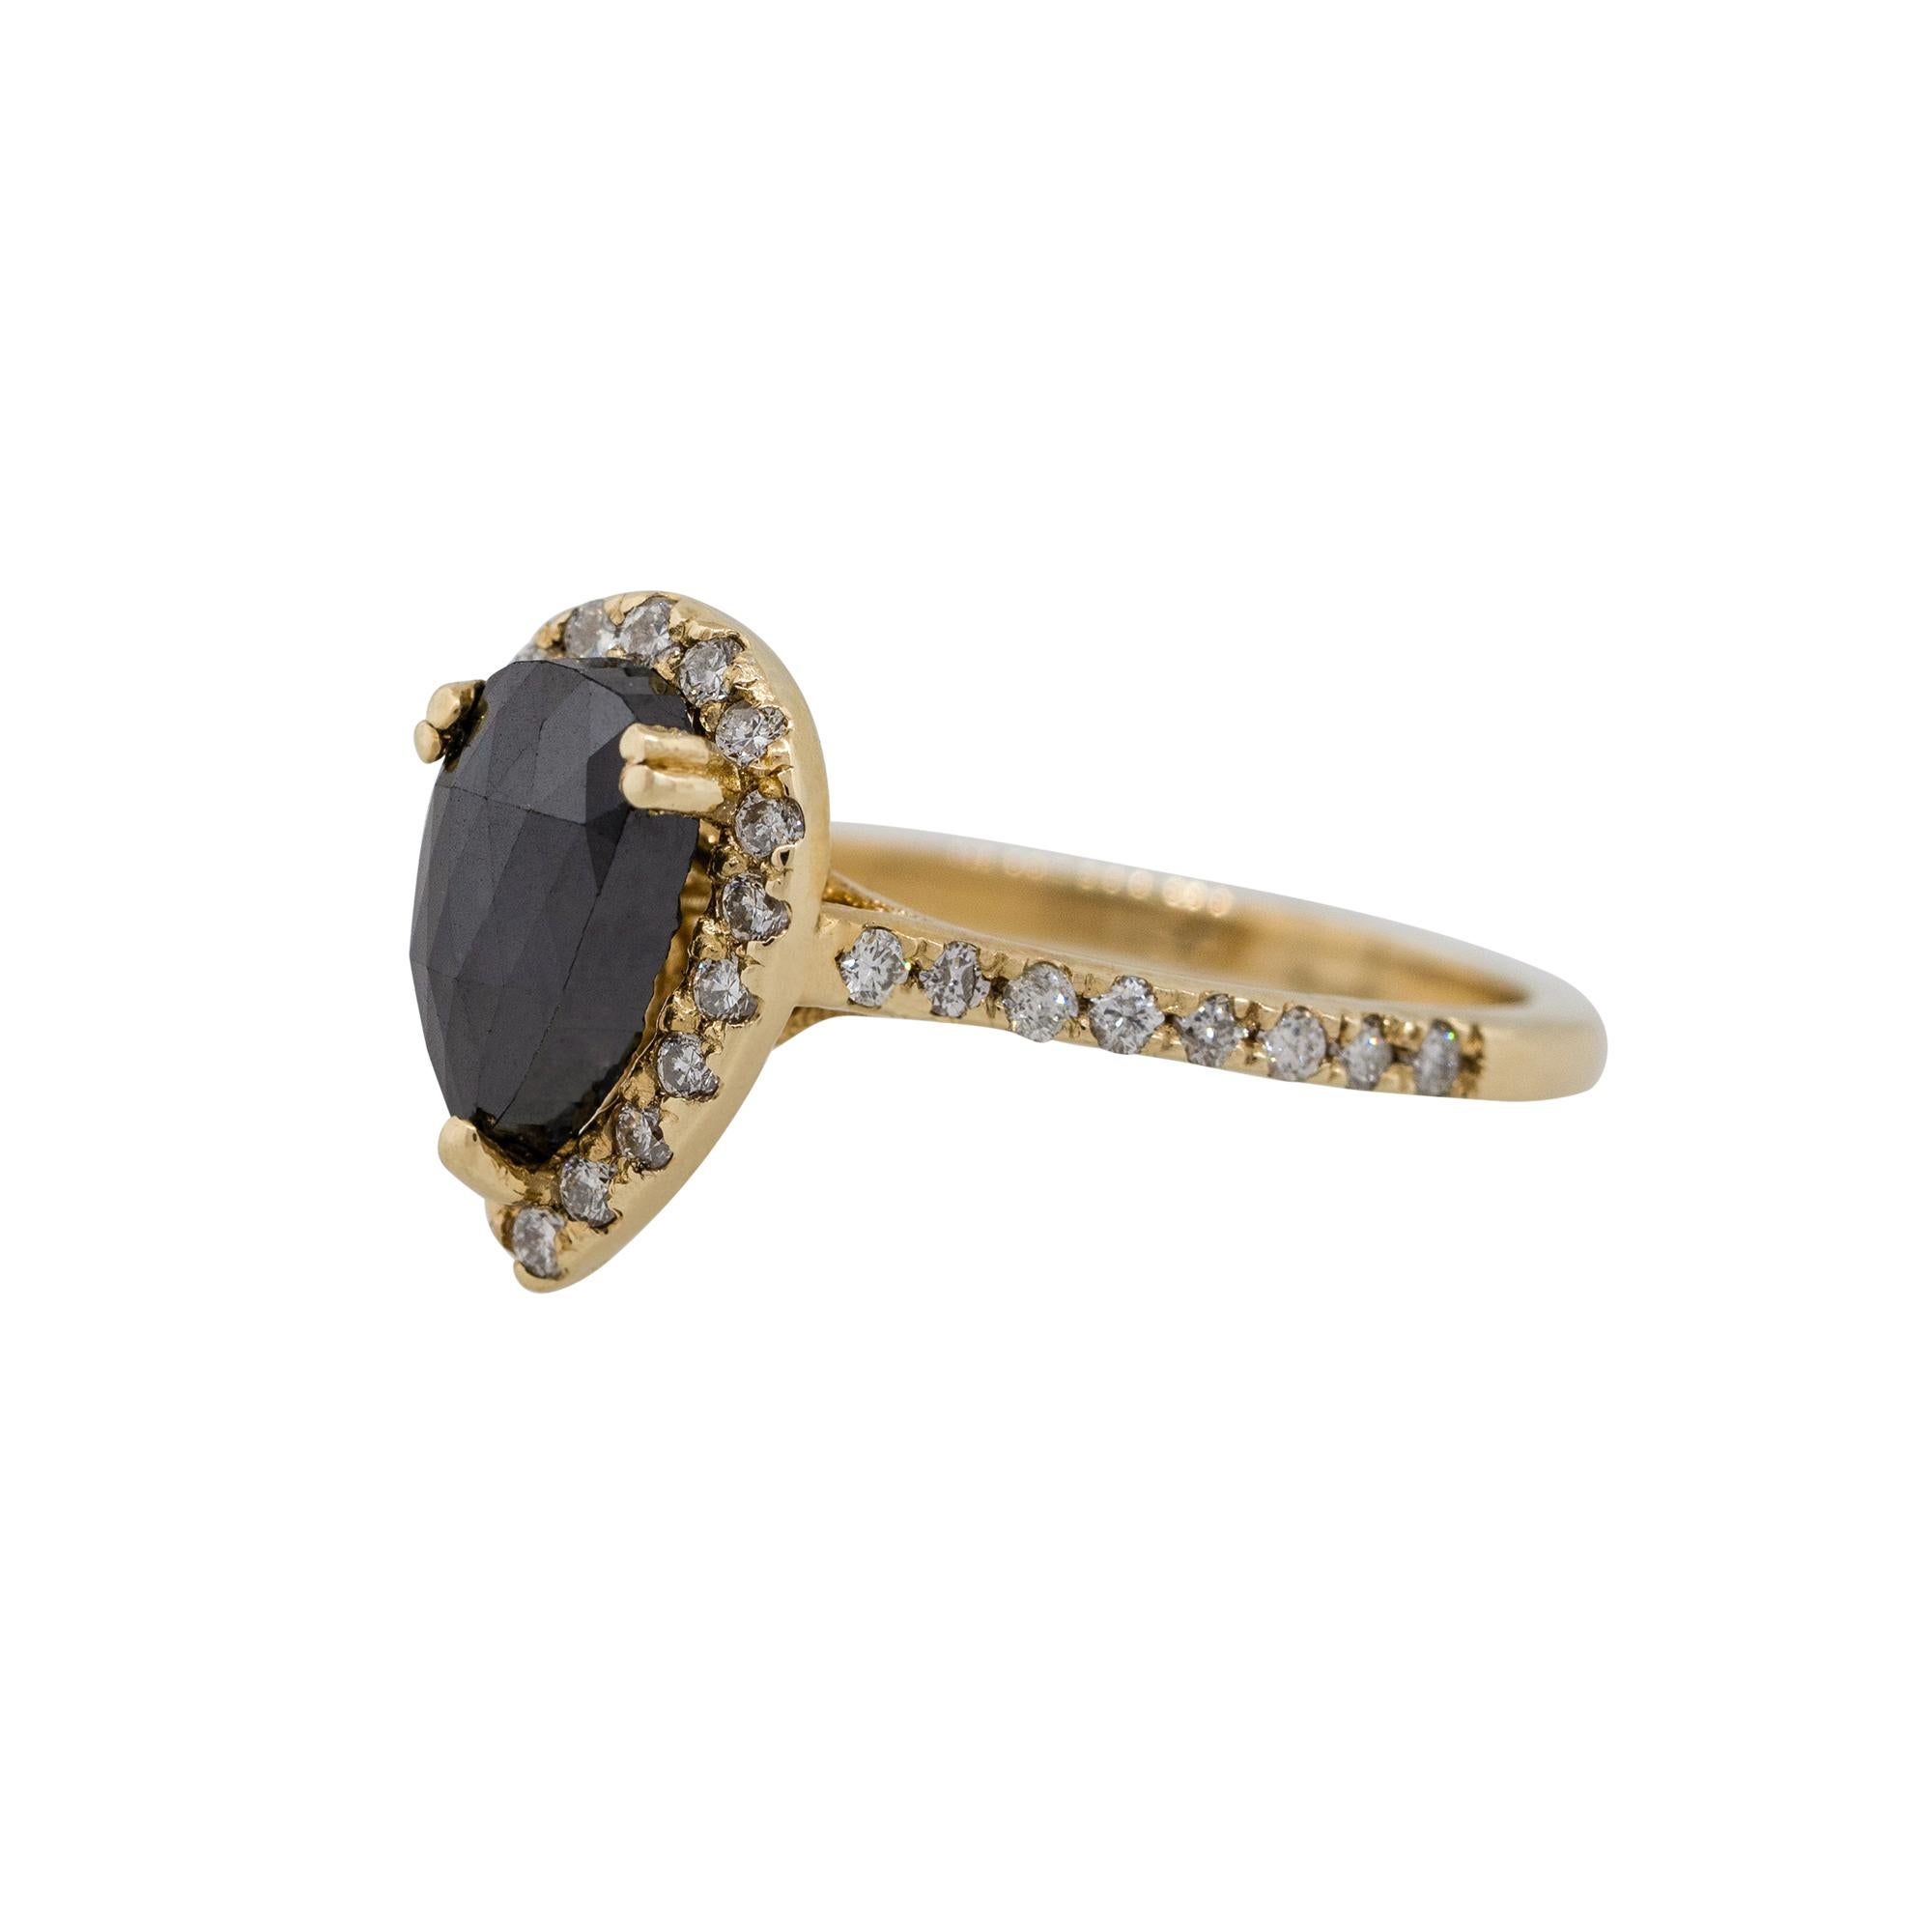 Material: 14k Yellow Gold
Diamond details: Approx. 1.65ctw pear shape Diamond. Diamond is Fancy Black in color and VS in clarity
                             Approx. 0.41 of round cut Diamonds. Diamonds are H in color and VS in clarity
Size: